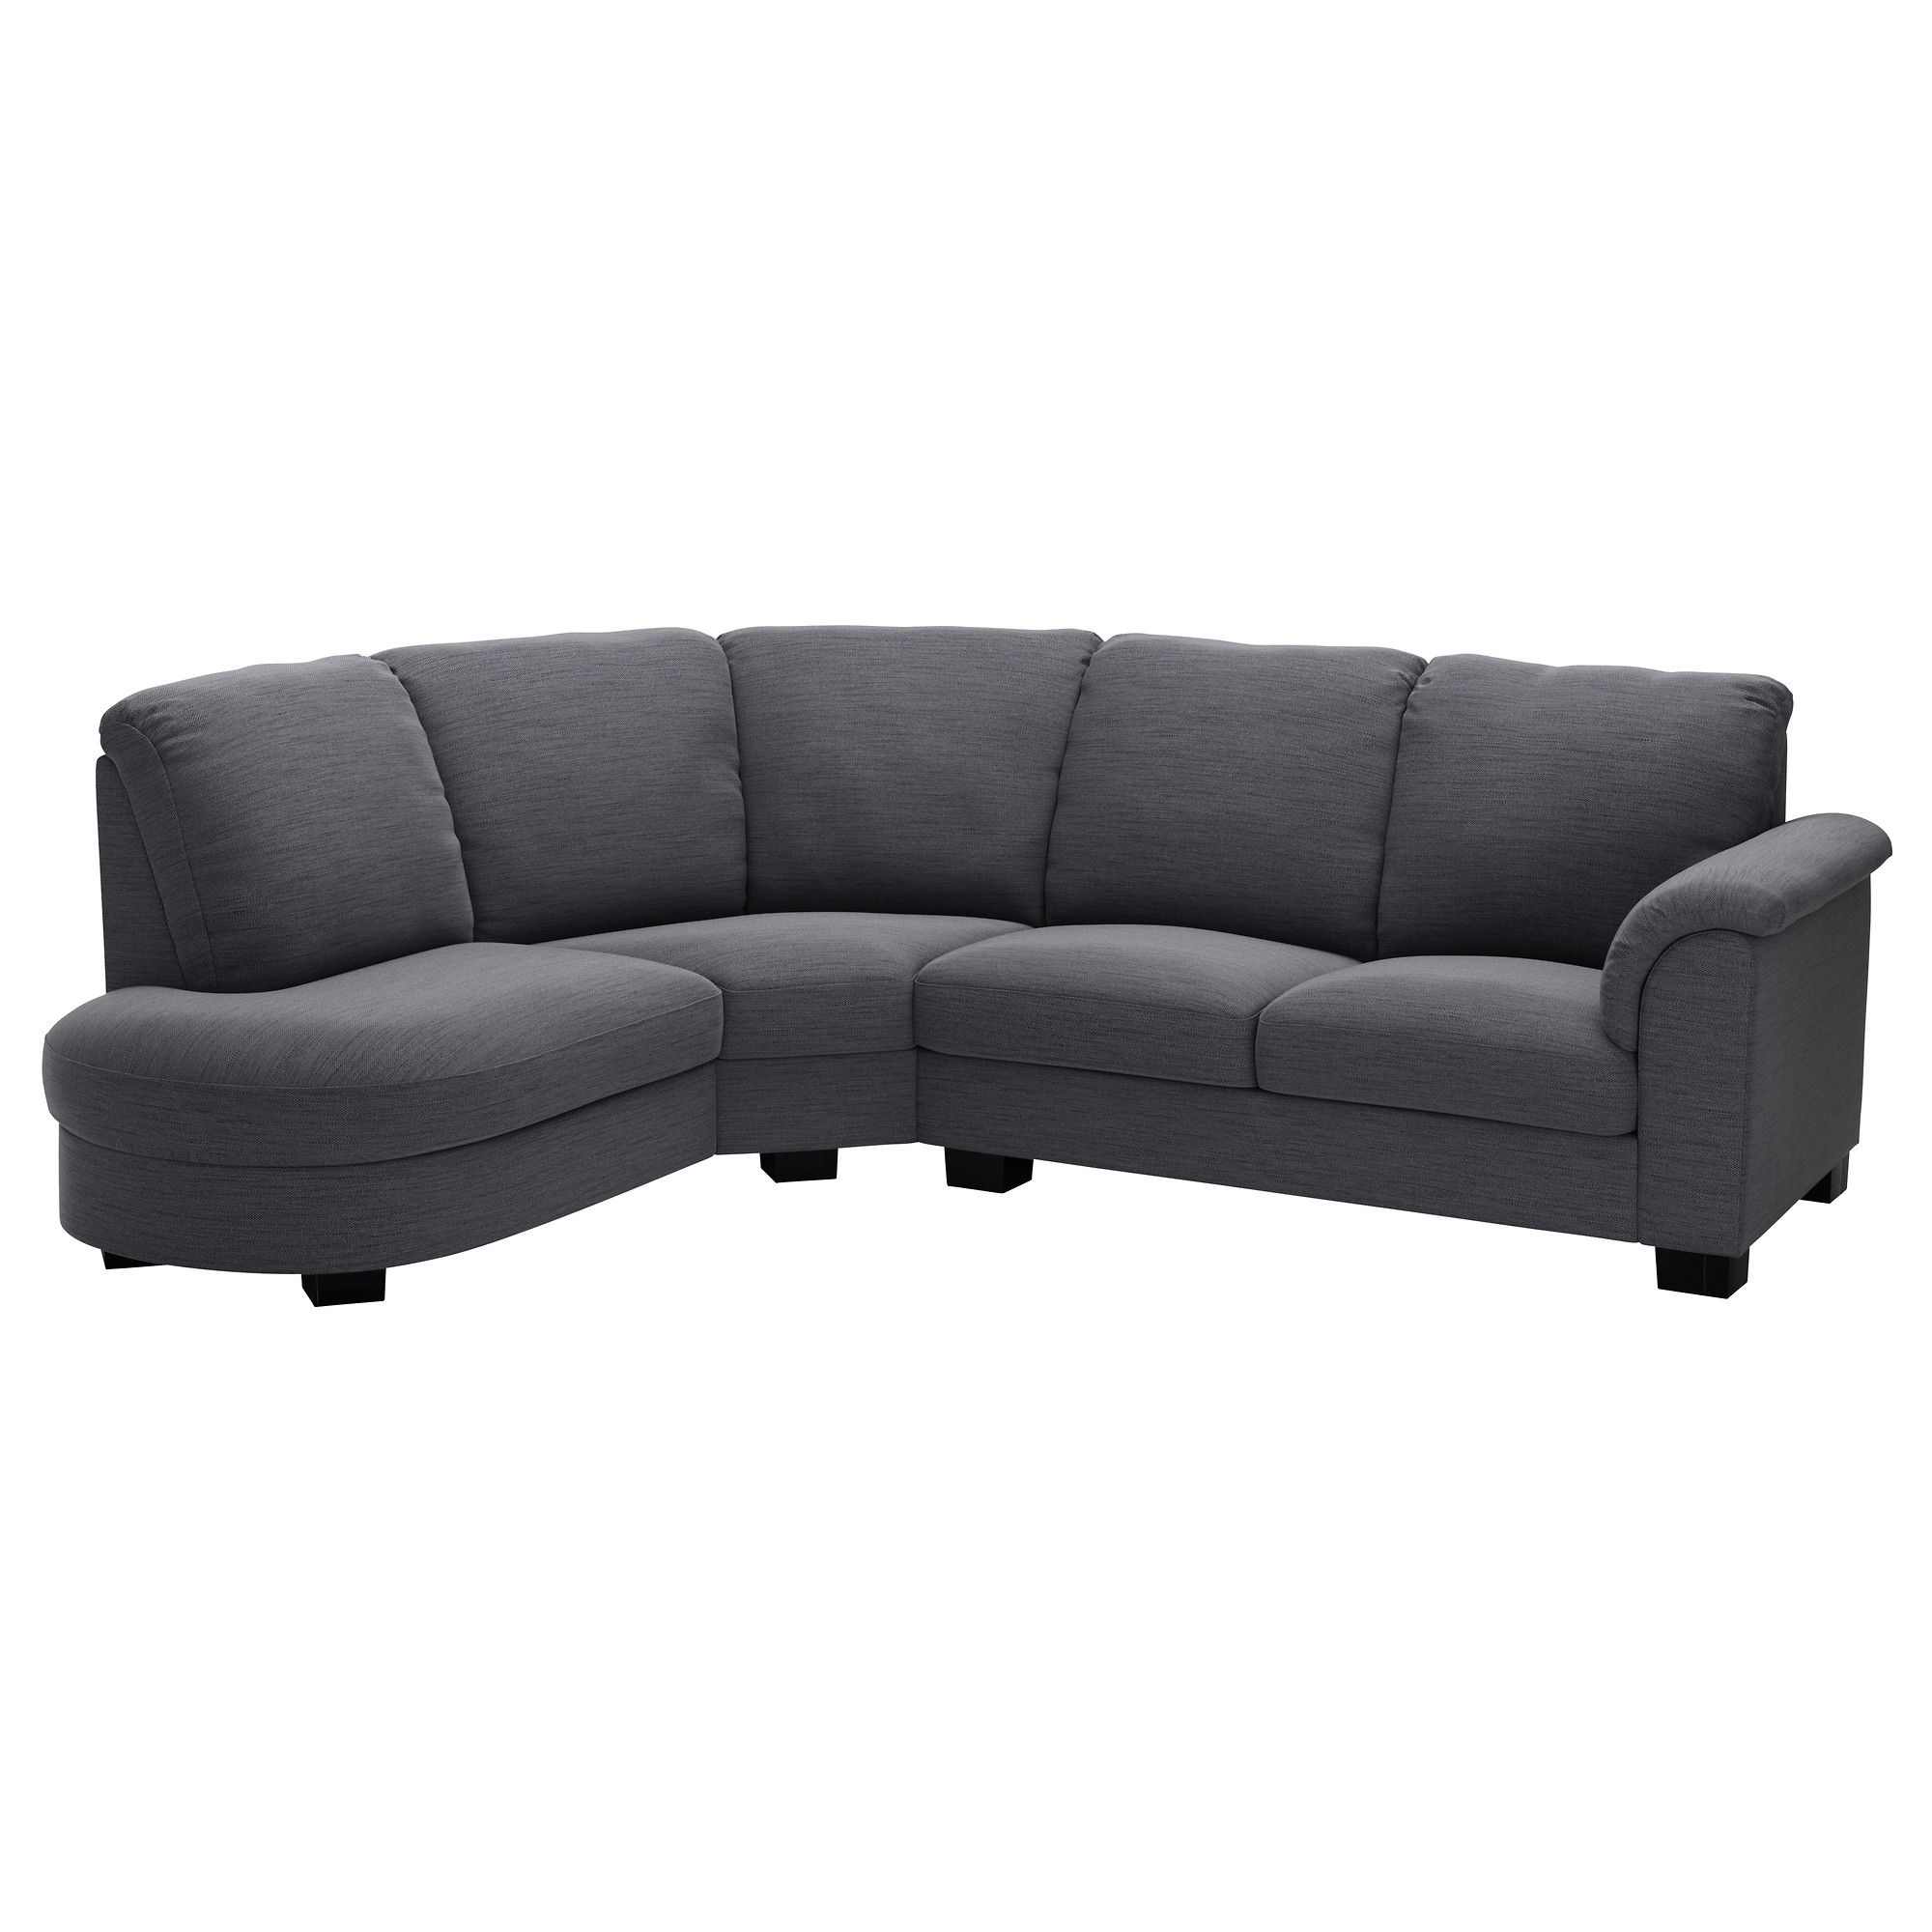 Well Known Corner Sofa Chairs Pertaining To Tidafors Corner Sofa With Arm Left – Dansbo Medium Brown – Ikea (View 6 of 20)